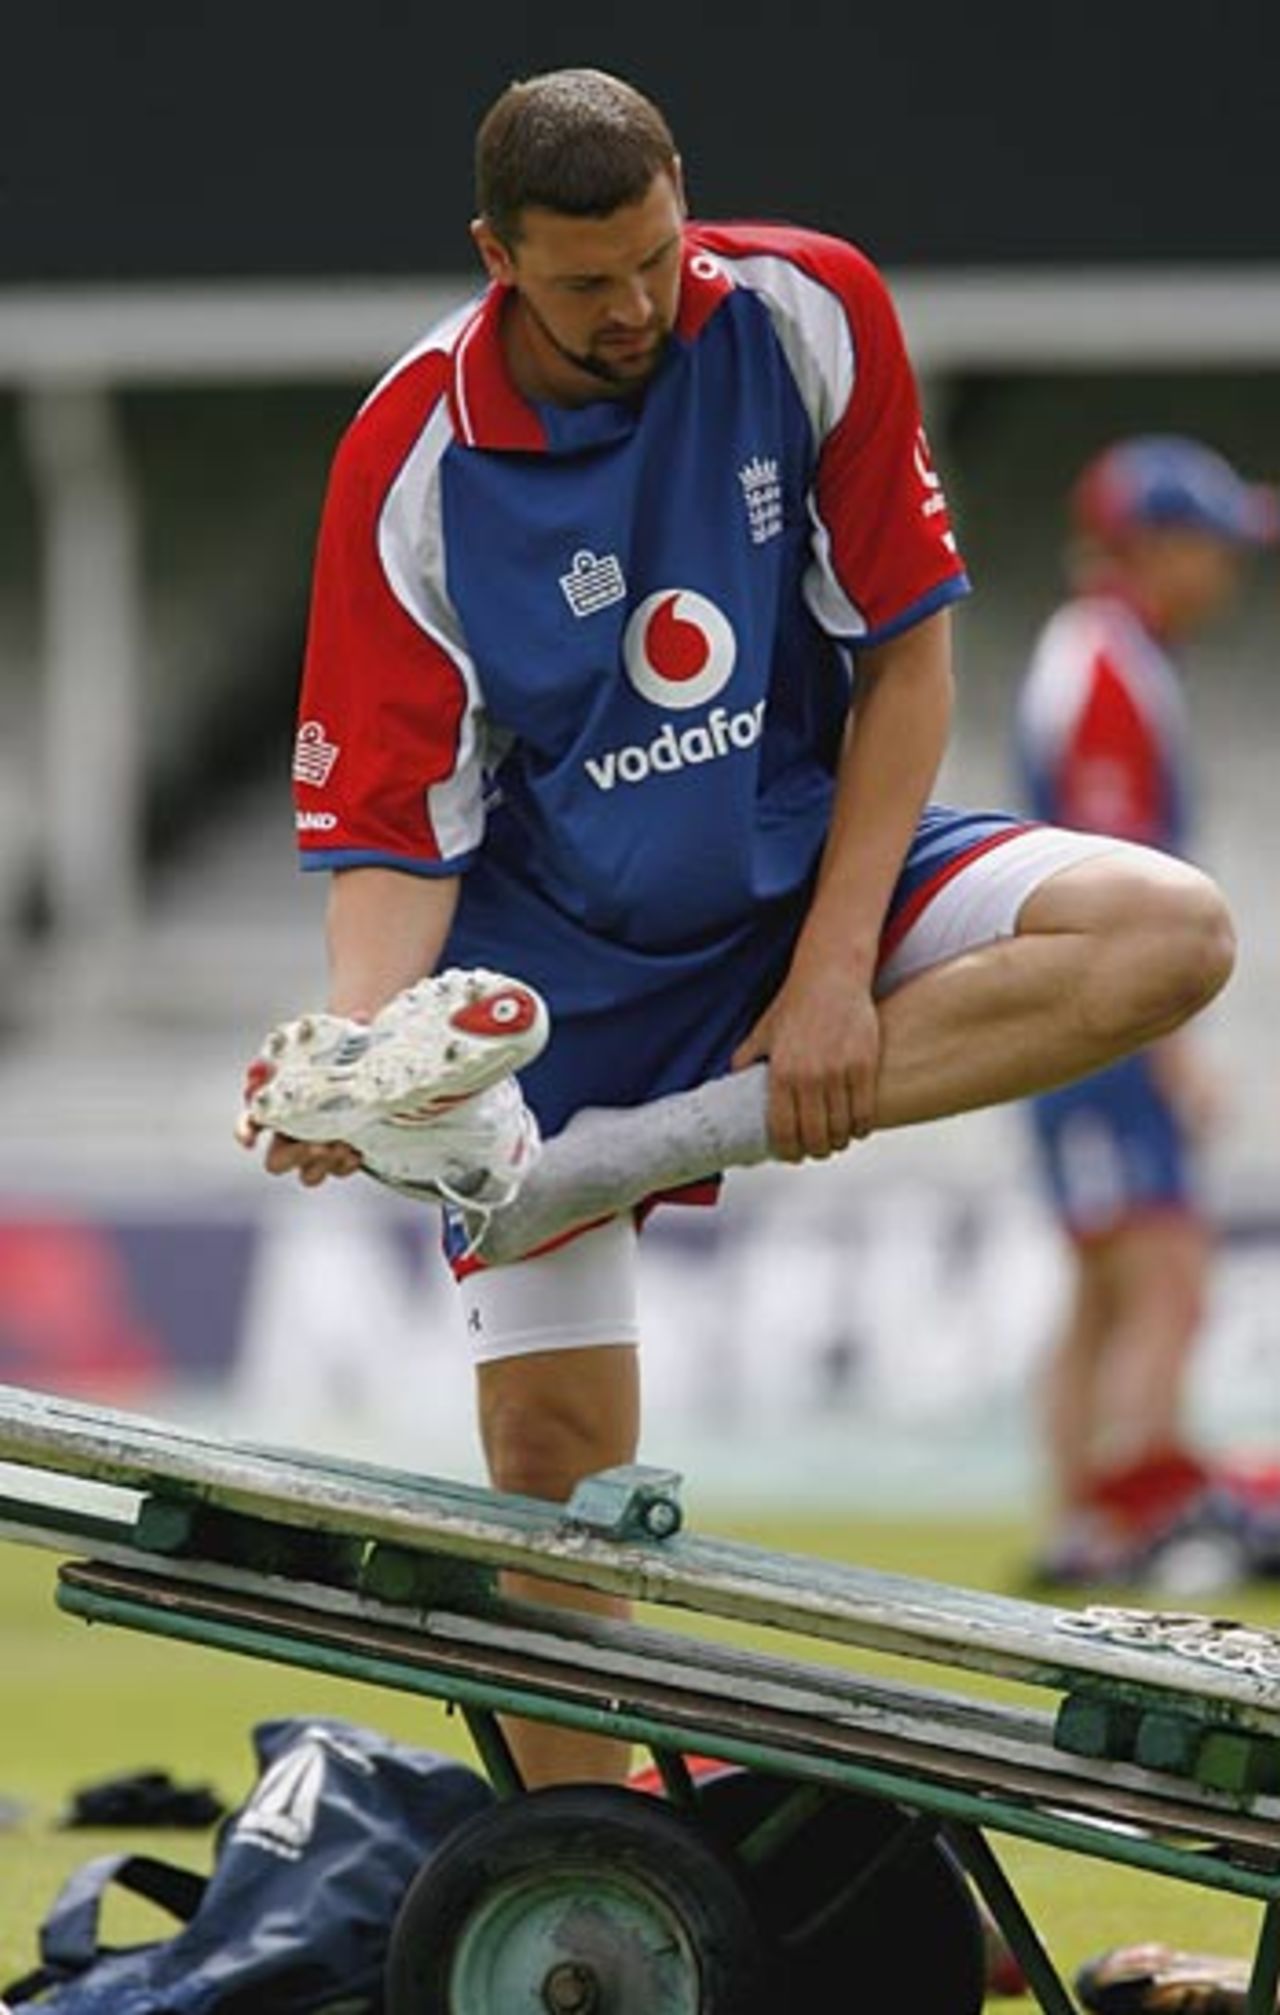 Steve Harmison during the England net session as they prepare for the second one-day international, The Oval, June 19, 2006